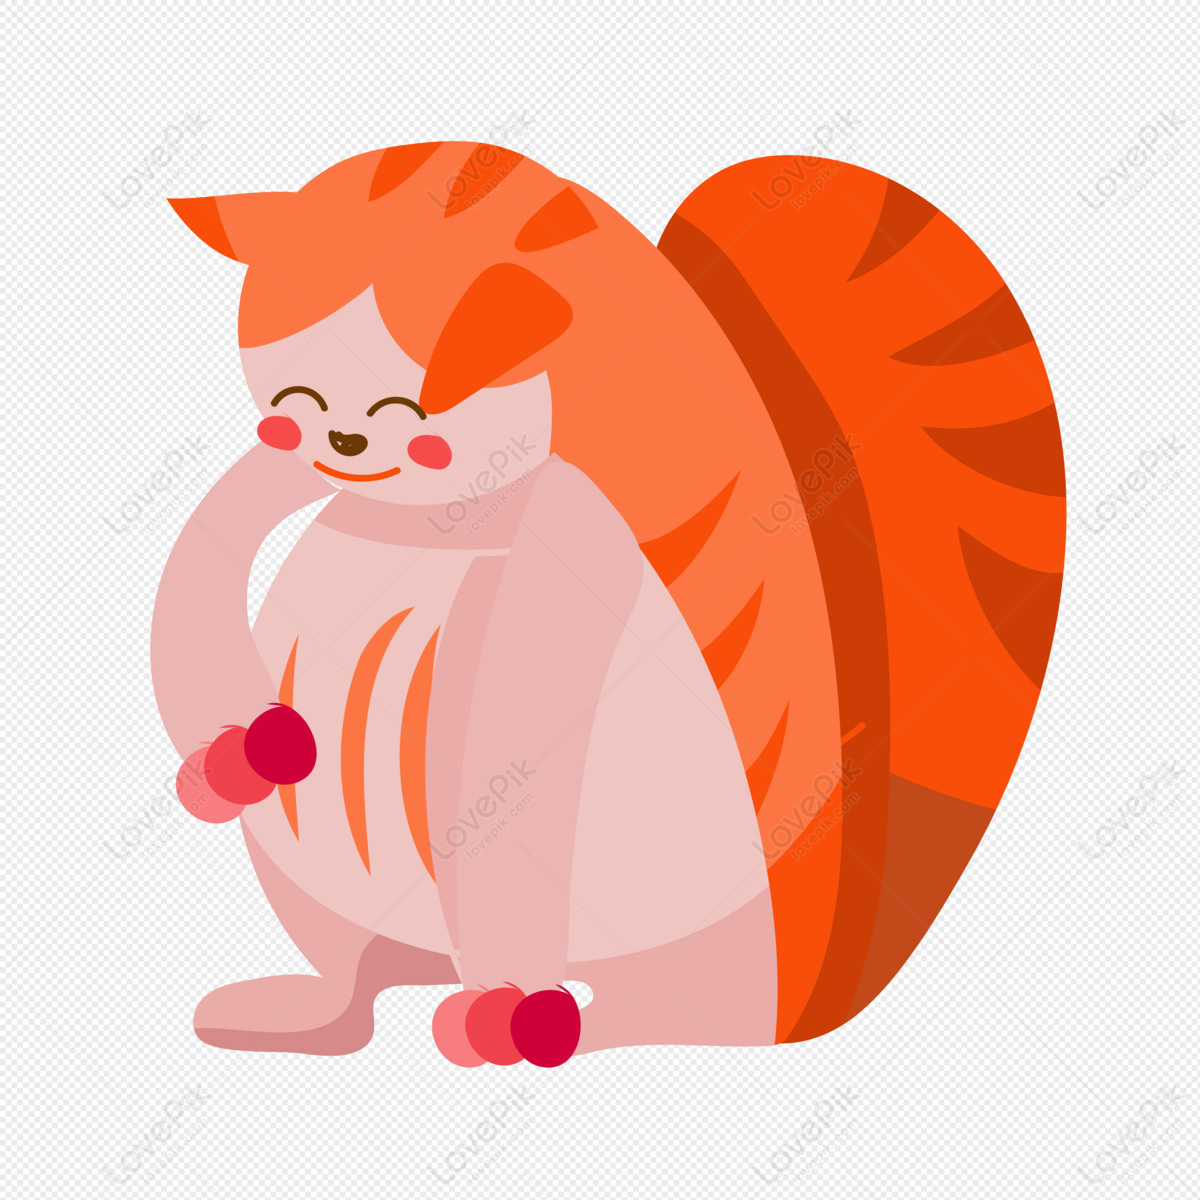 Cute Big Fat Cat PNG Image Free Download And Clipart Image For.